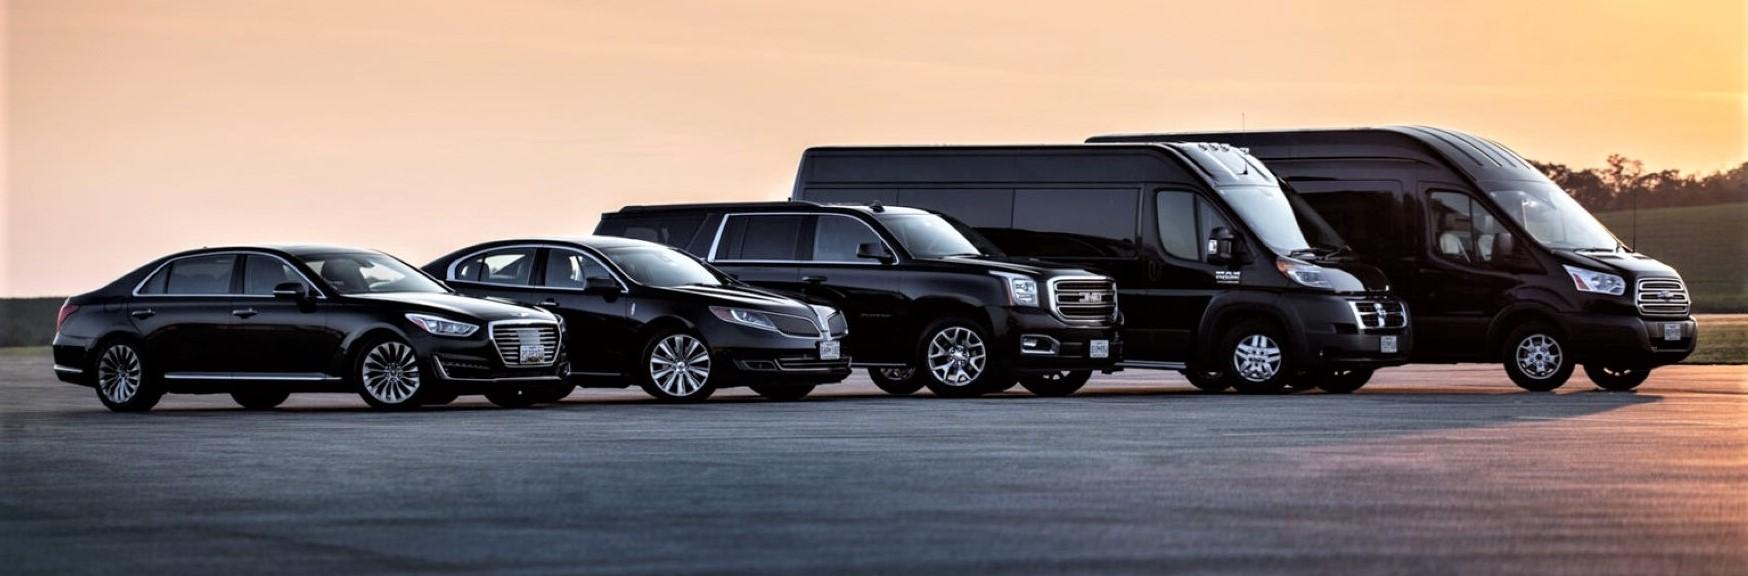 Tomball Limo Car Service